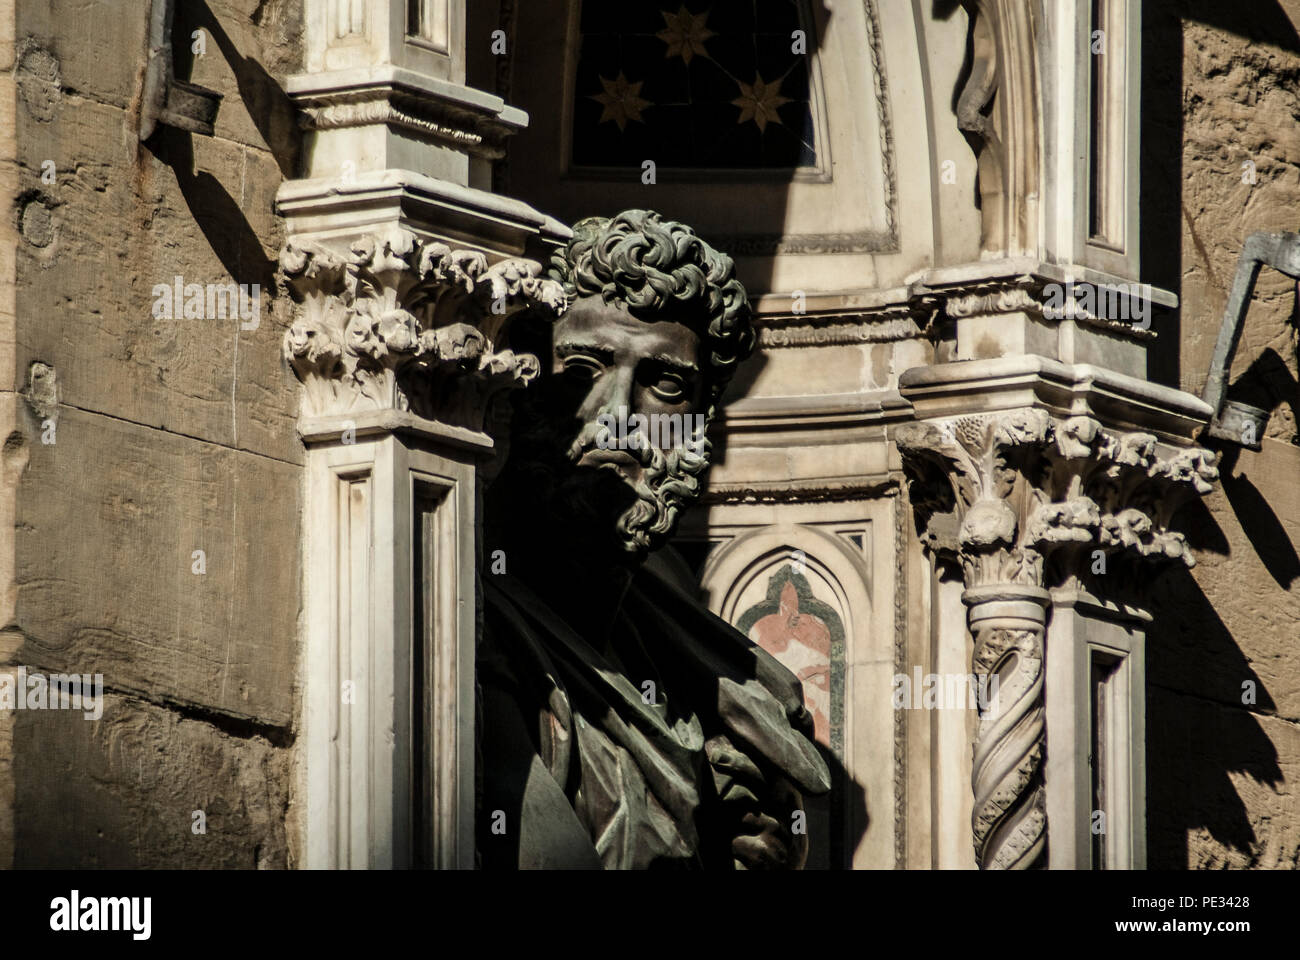 FLORENCE-FEBRUARY 16: the statue of saint Luke(replica) by Giambologna in the exterior of the Orsanmichele church,Florence,Italy,on February 16,2012. Stock Photo